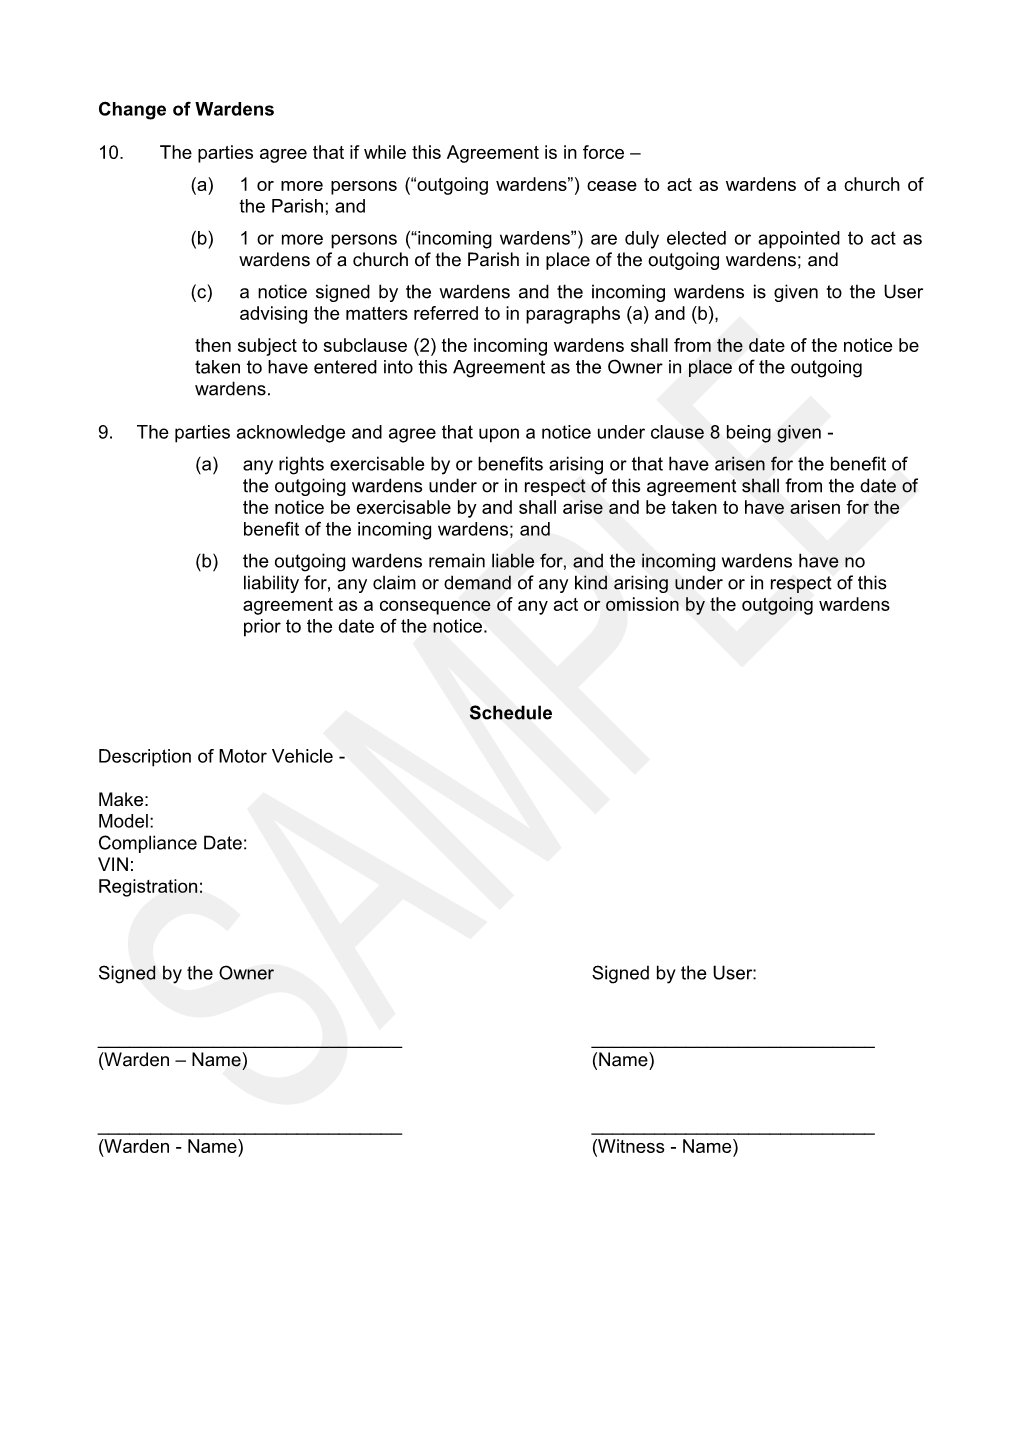 Agreement for the Purchase and Use of a Motor Vehicle